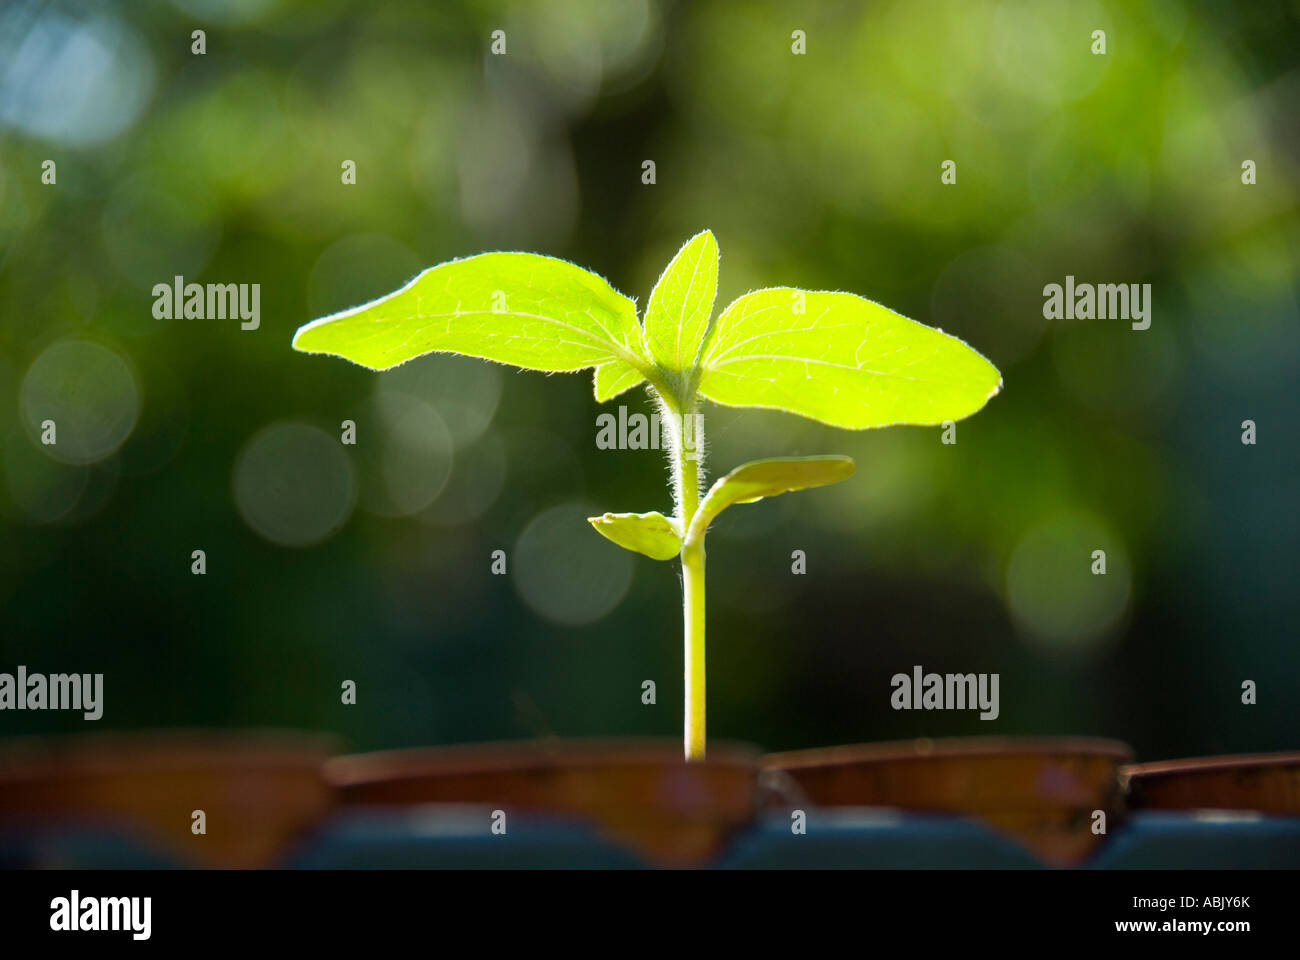 Backlit Sunflower Seedling Sprouting Stock Photo